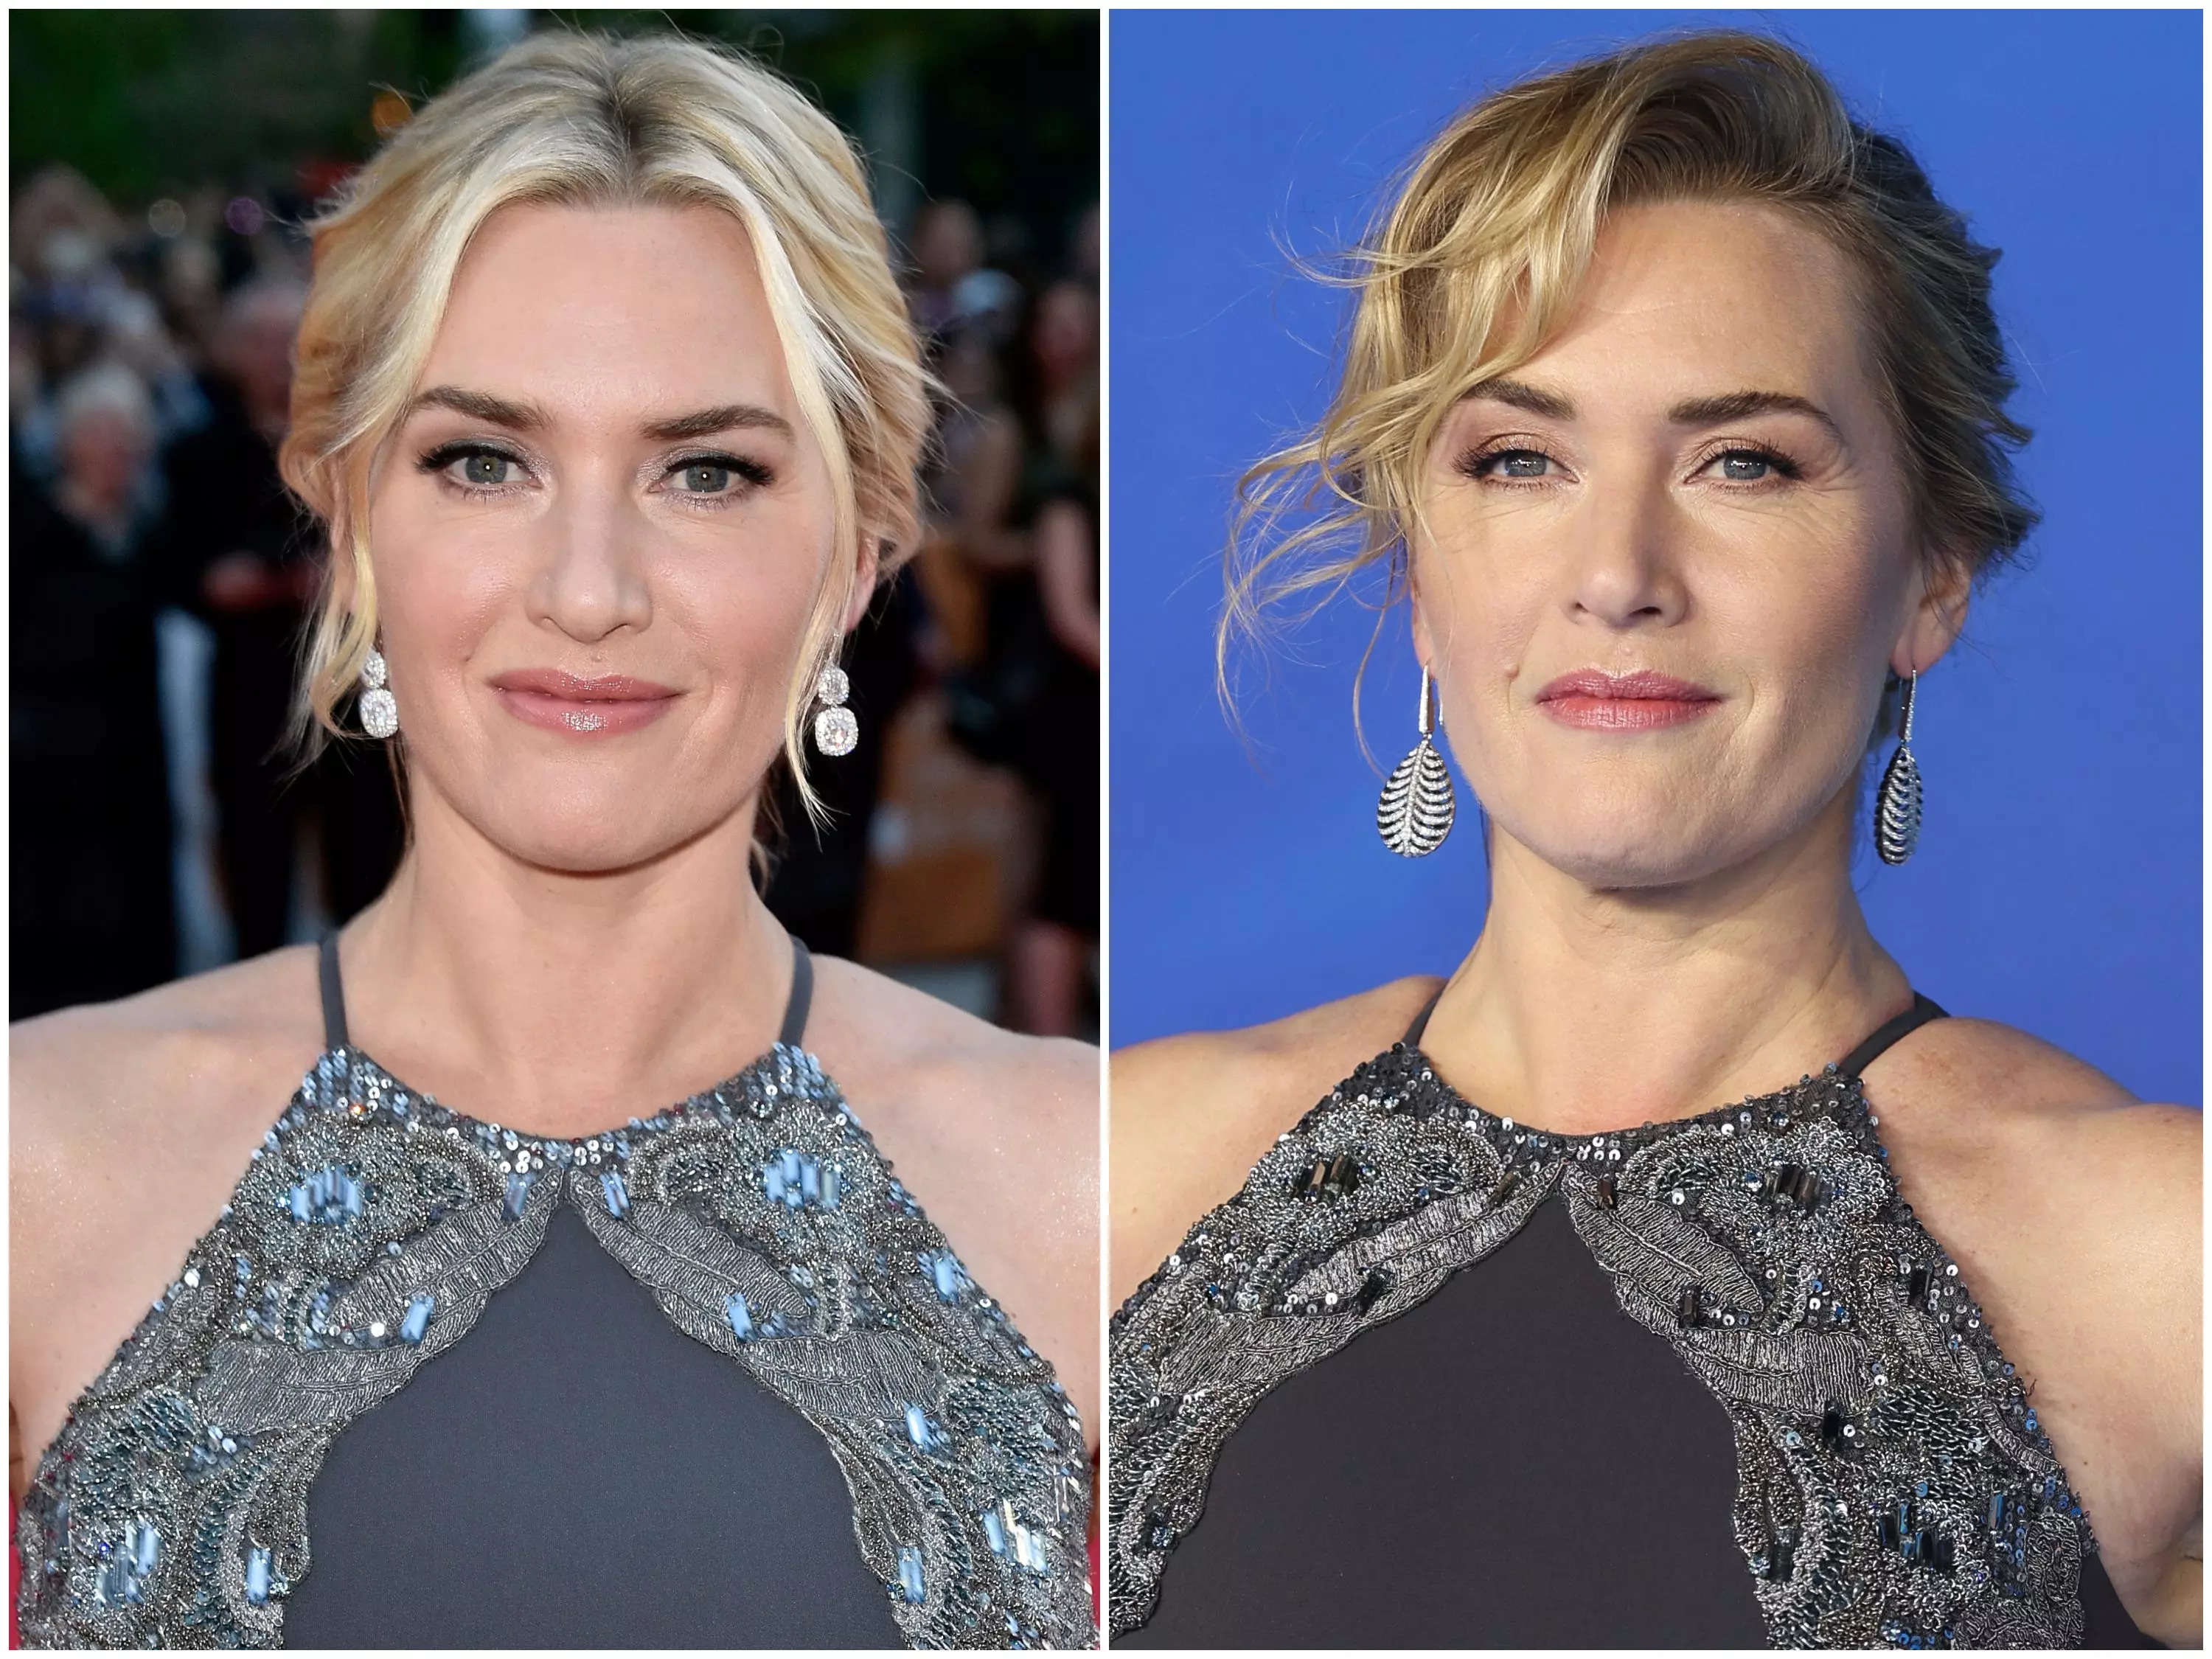 Dress Obsession: Revolutionary Road and Kate Winslet | 3 Hours Past the  Edge of the World